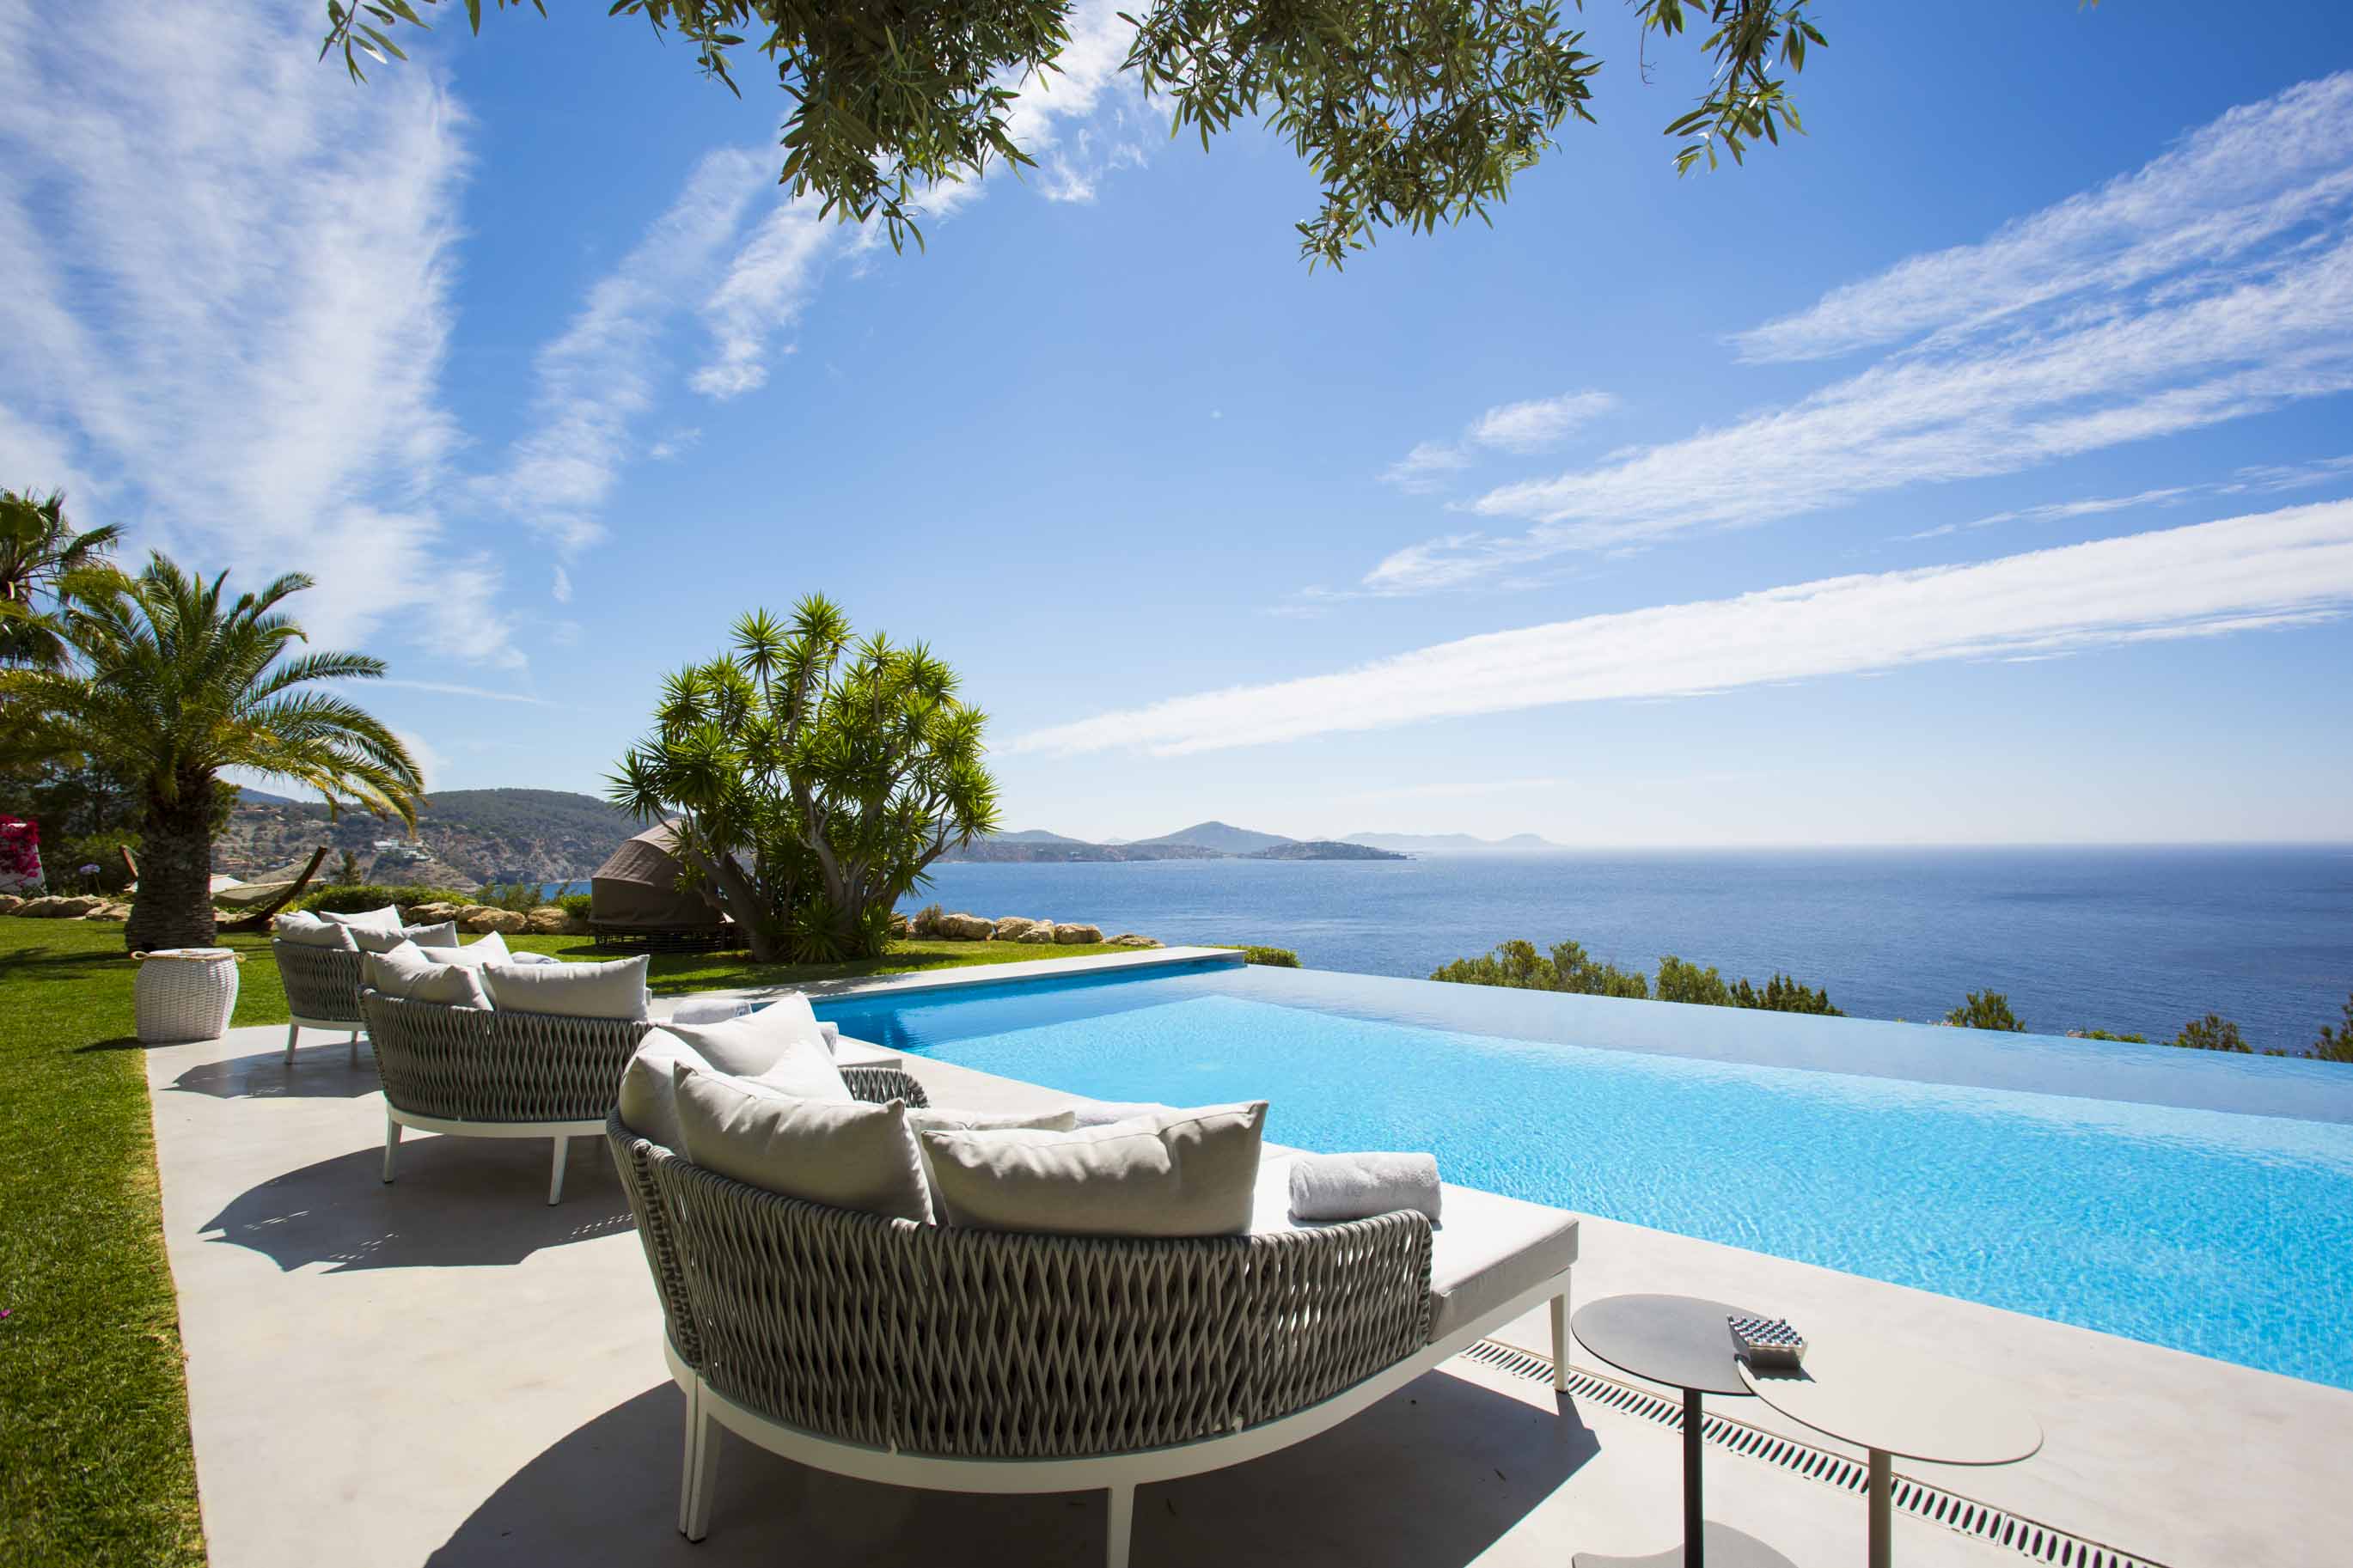 Luxury, charm and style in the south of Ibiza